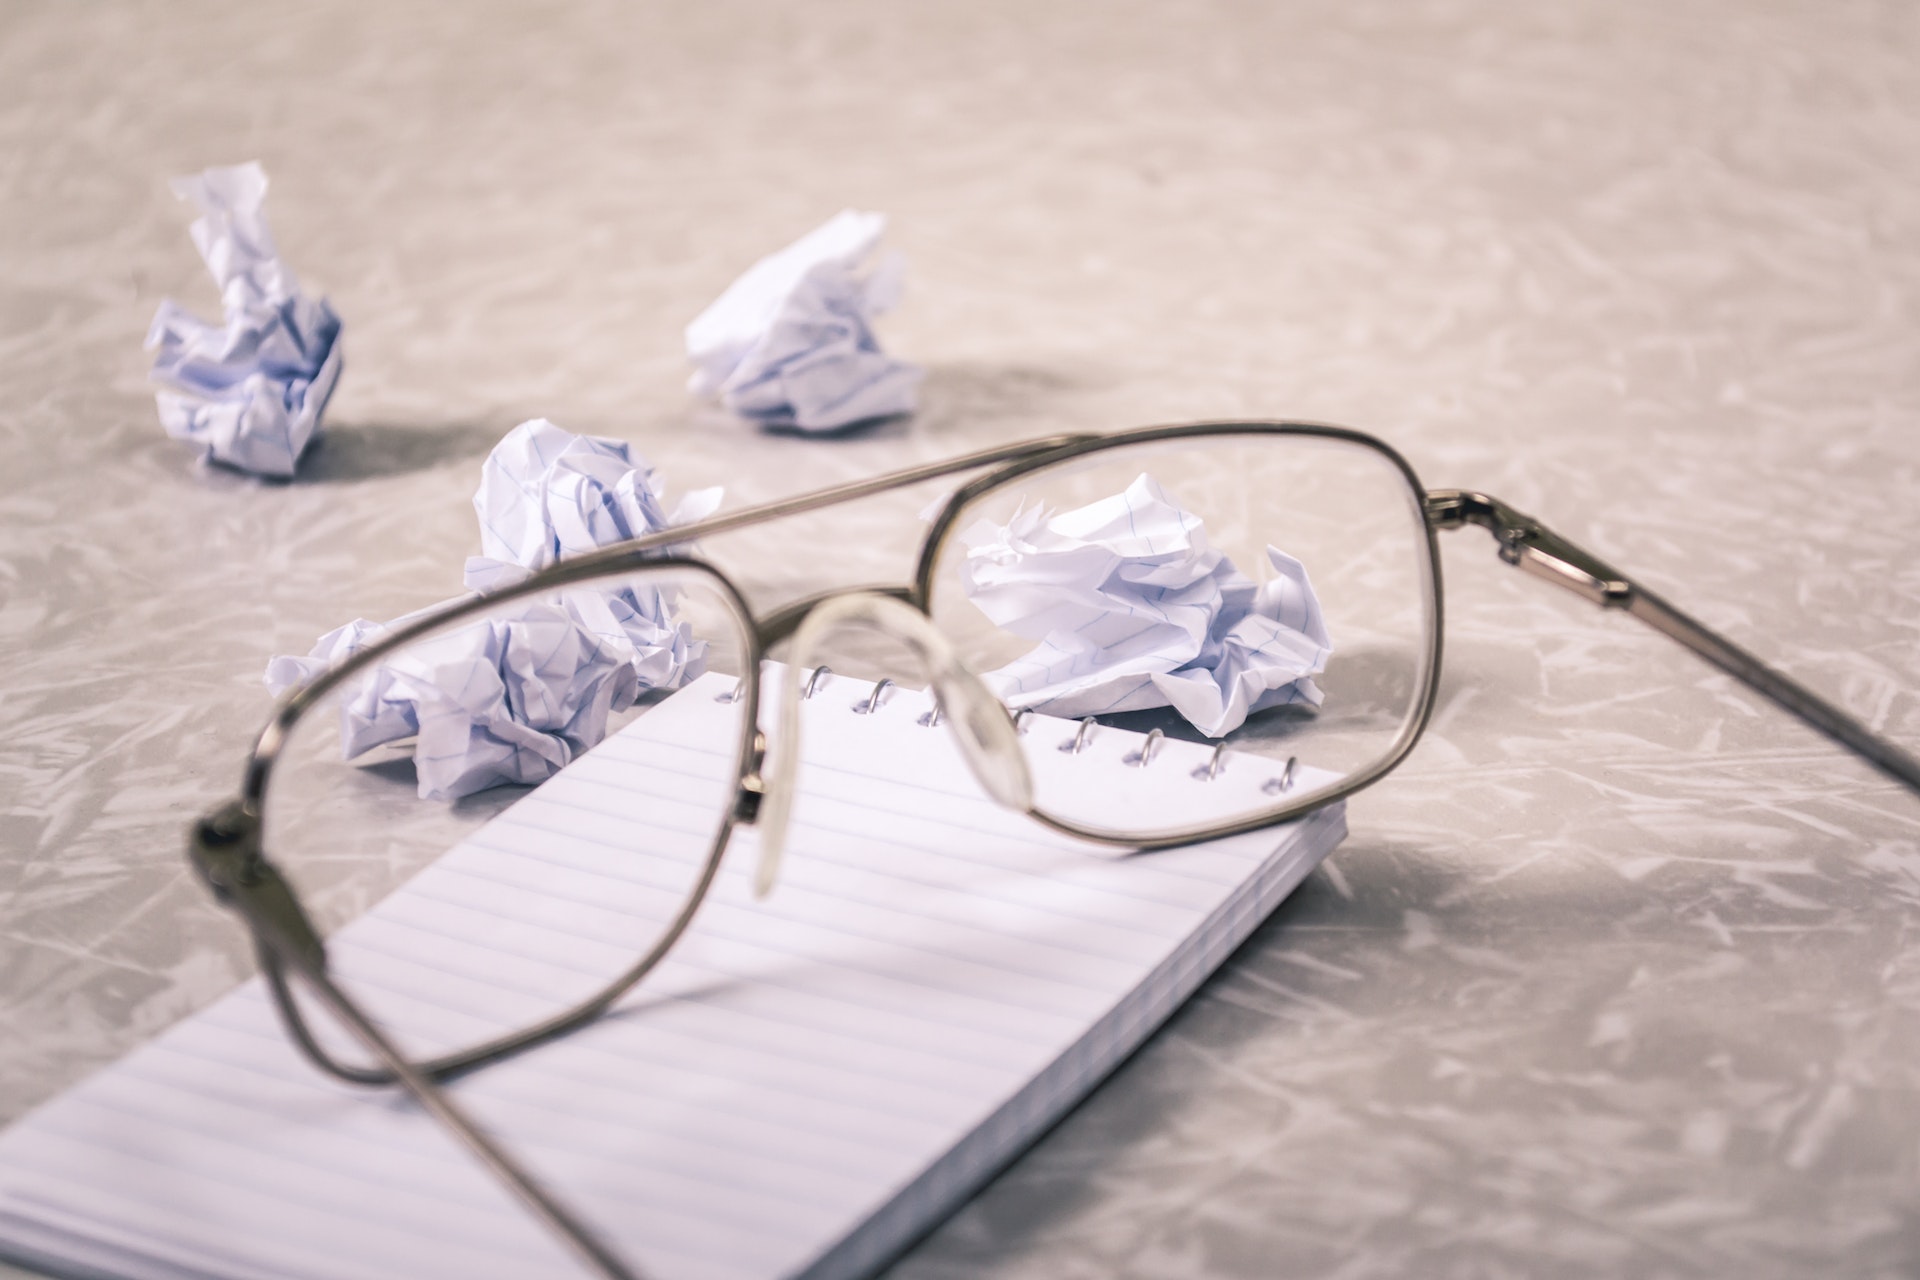 Glasses and Crumpled Paper, representing whistleblowing